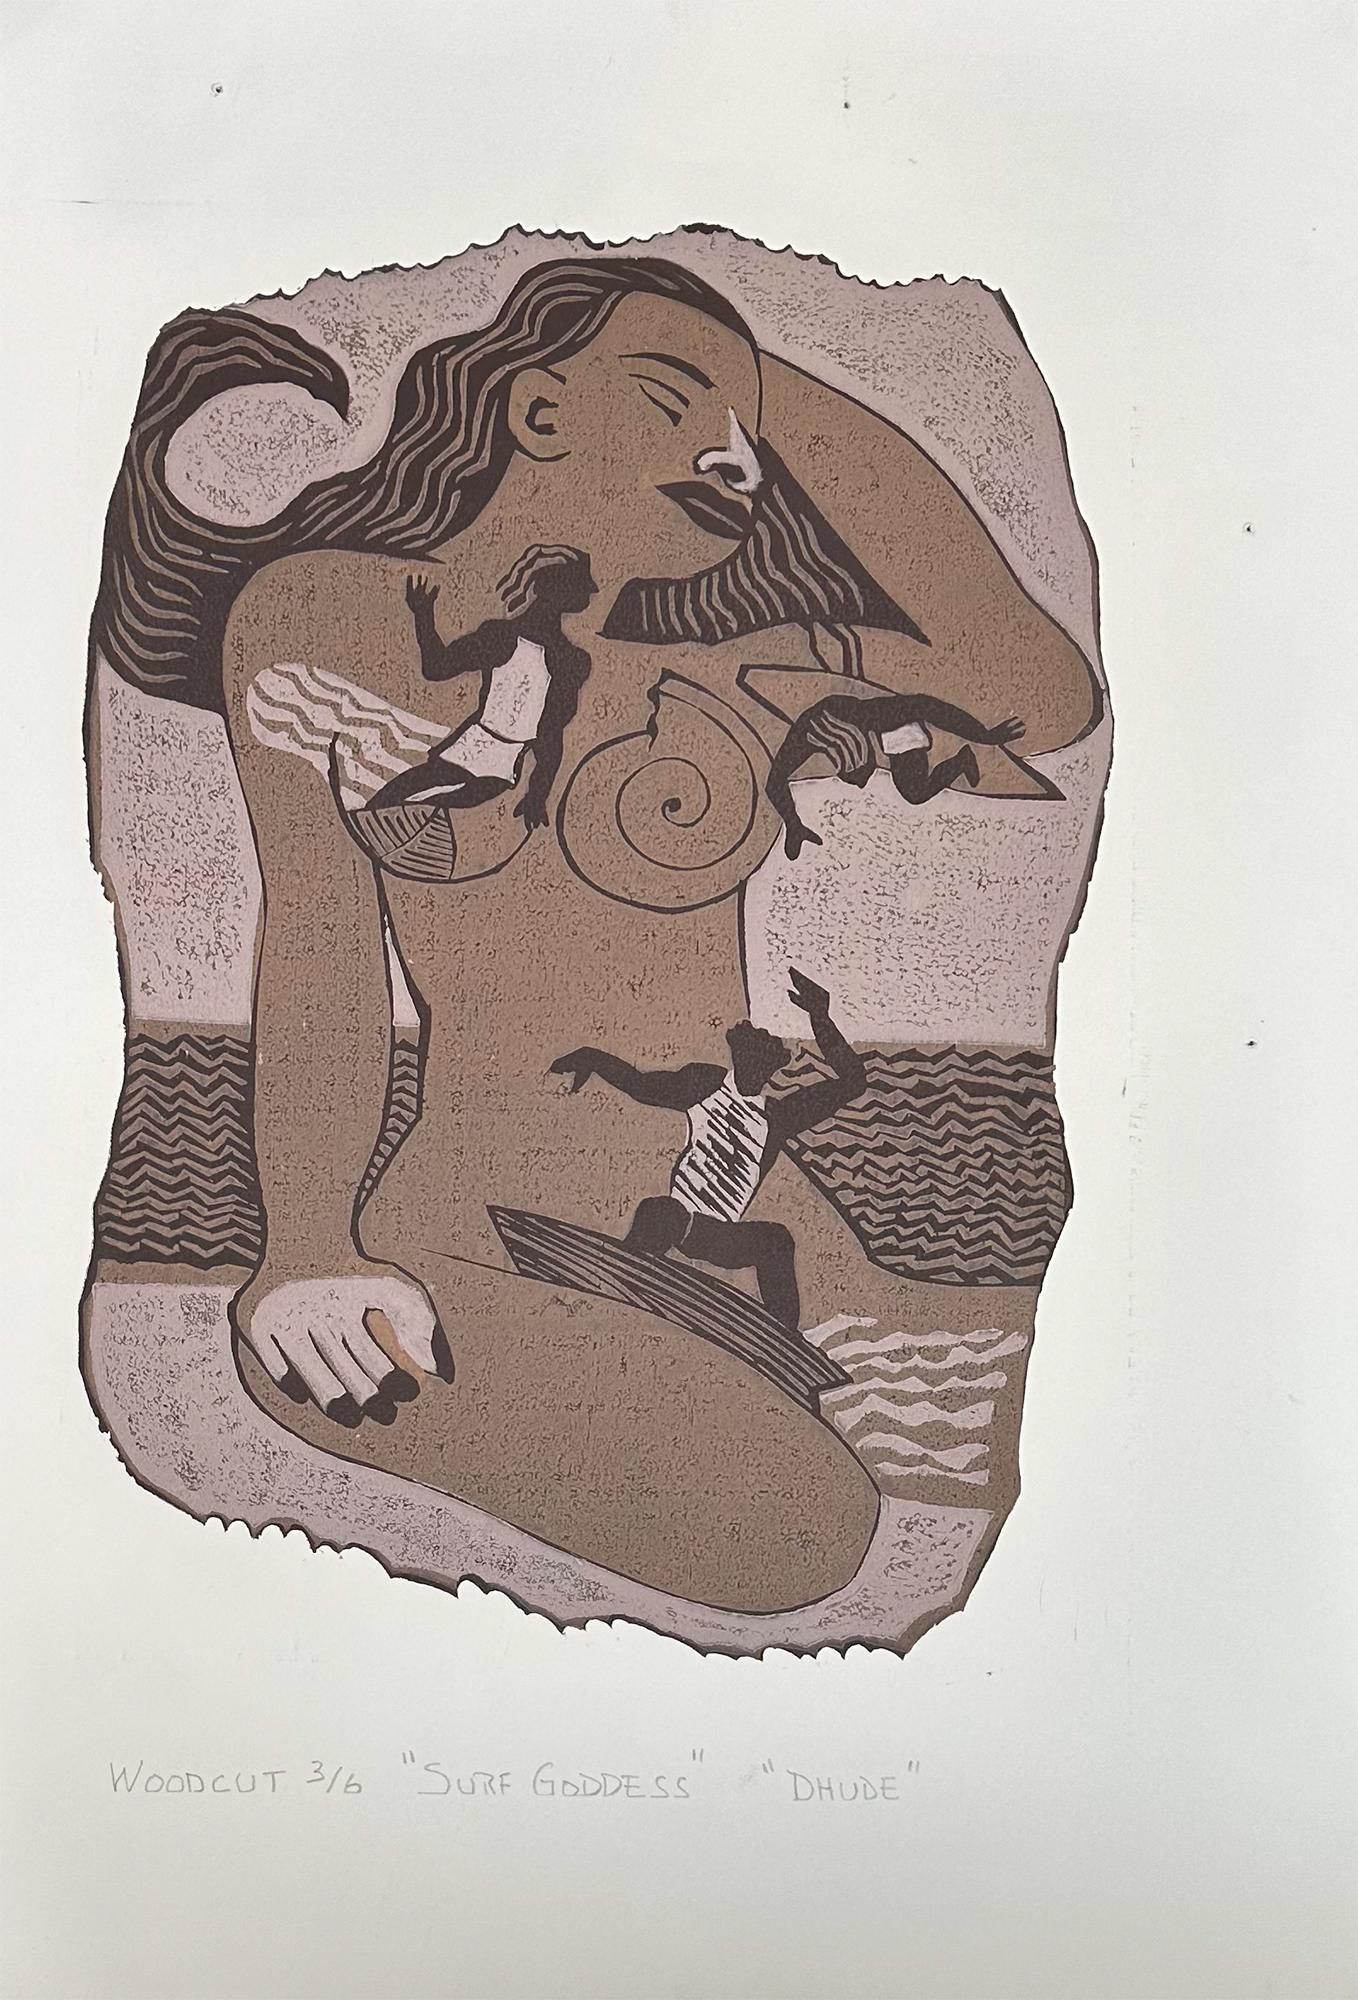 Surf Goddess - Surfing Art - Figurative - Woodcut Print By Marc Zimmerman

Limited Edition 01/04

This masterwork is exhibited in the Zimmerman Gallery, Carmel CA.

Immerse yourself in the captivating world of surfing and ocean vibes with Marc